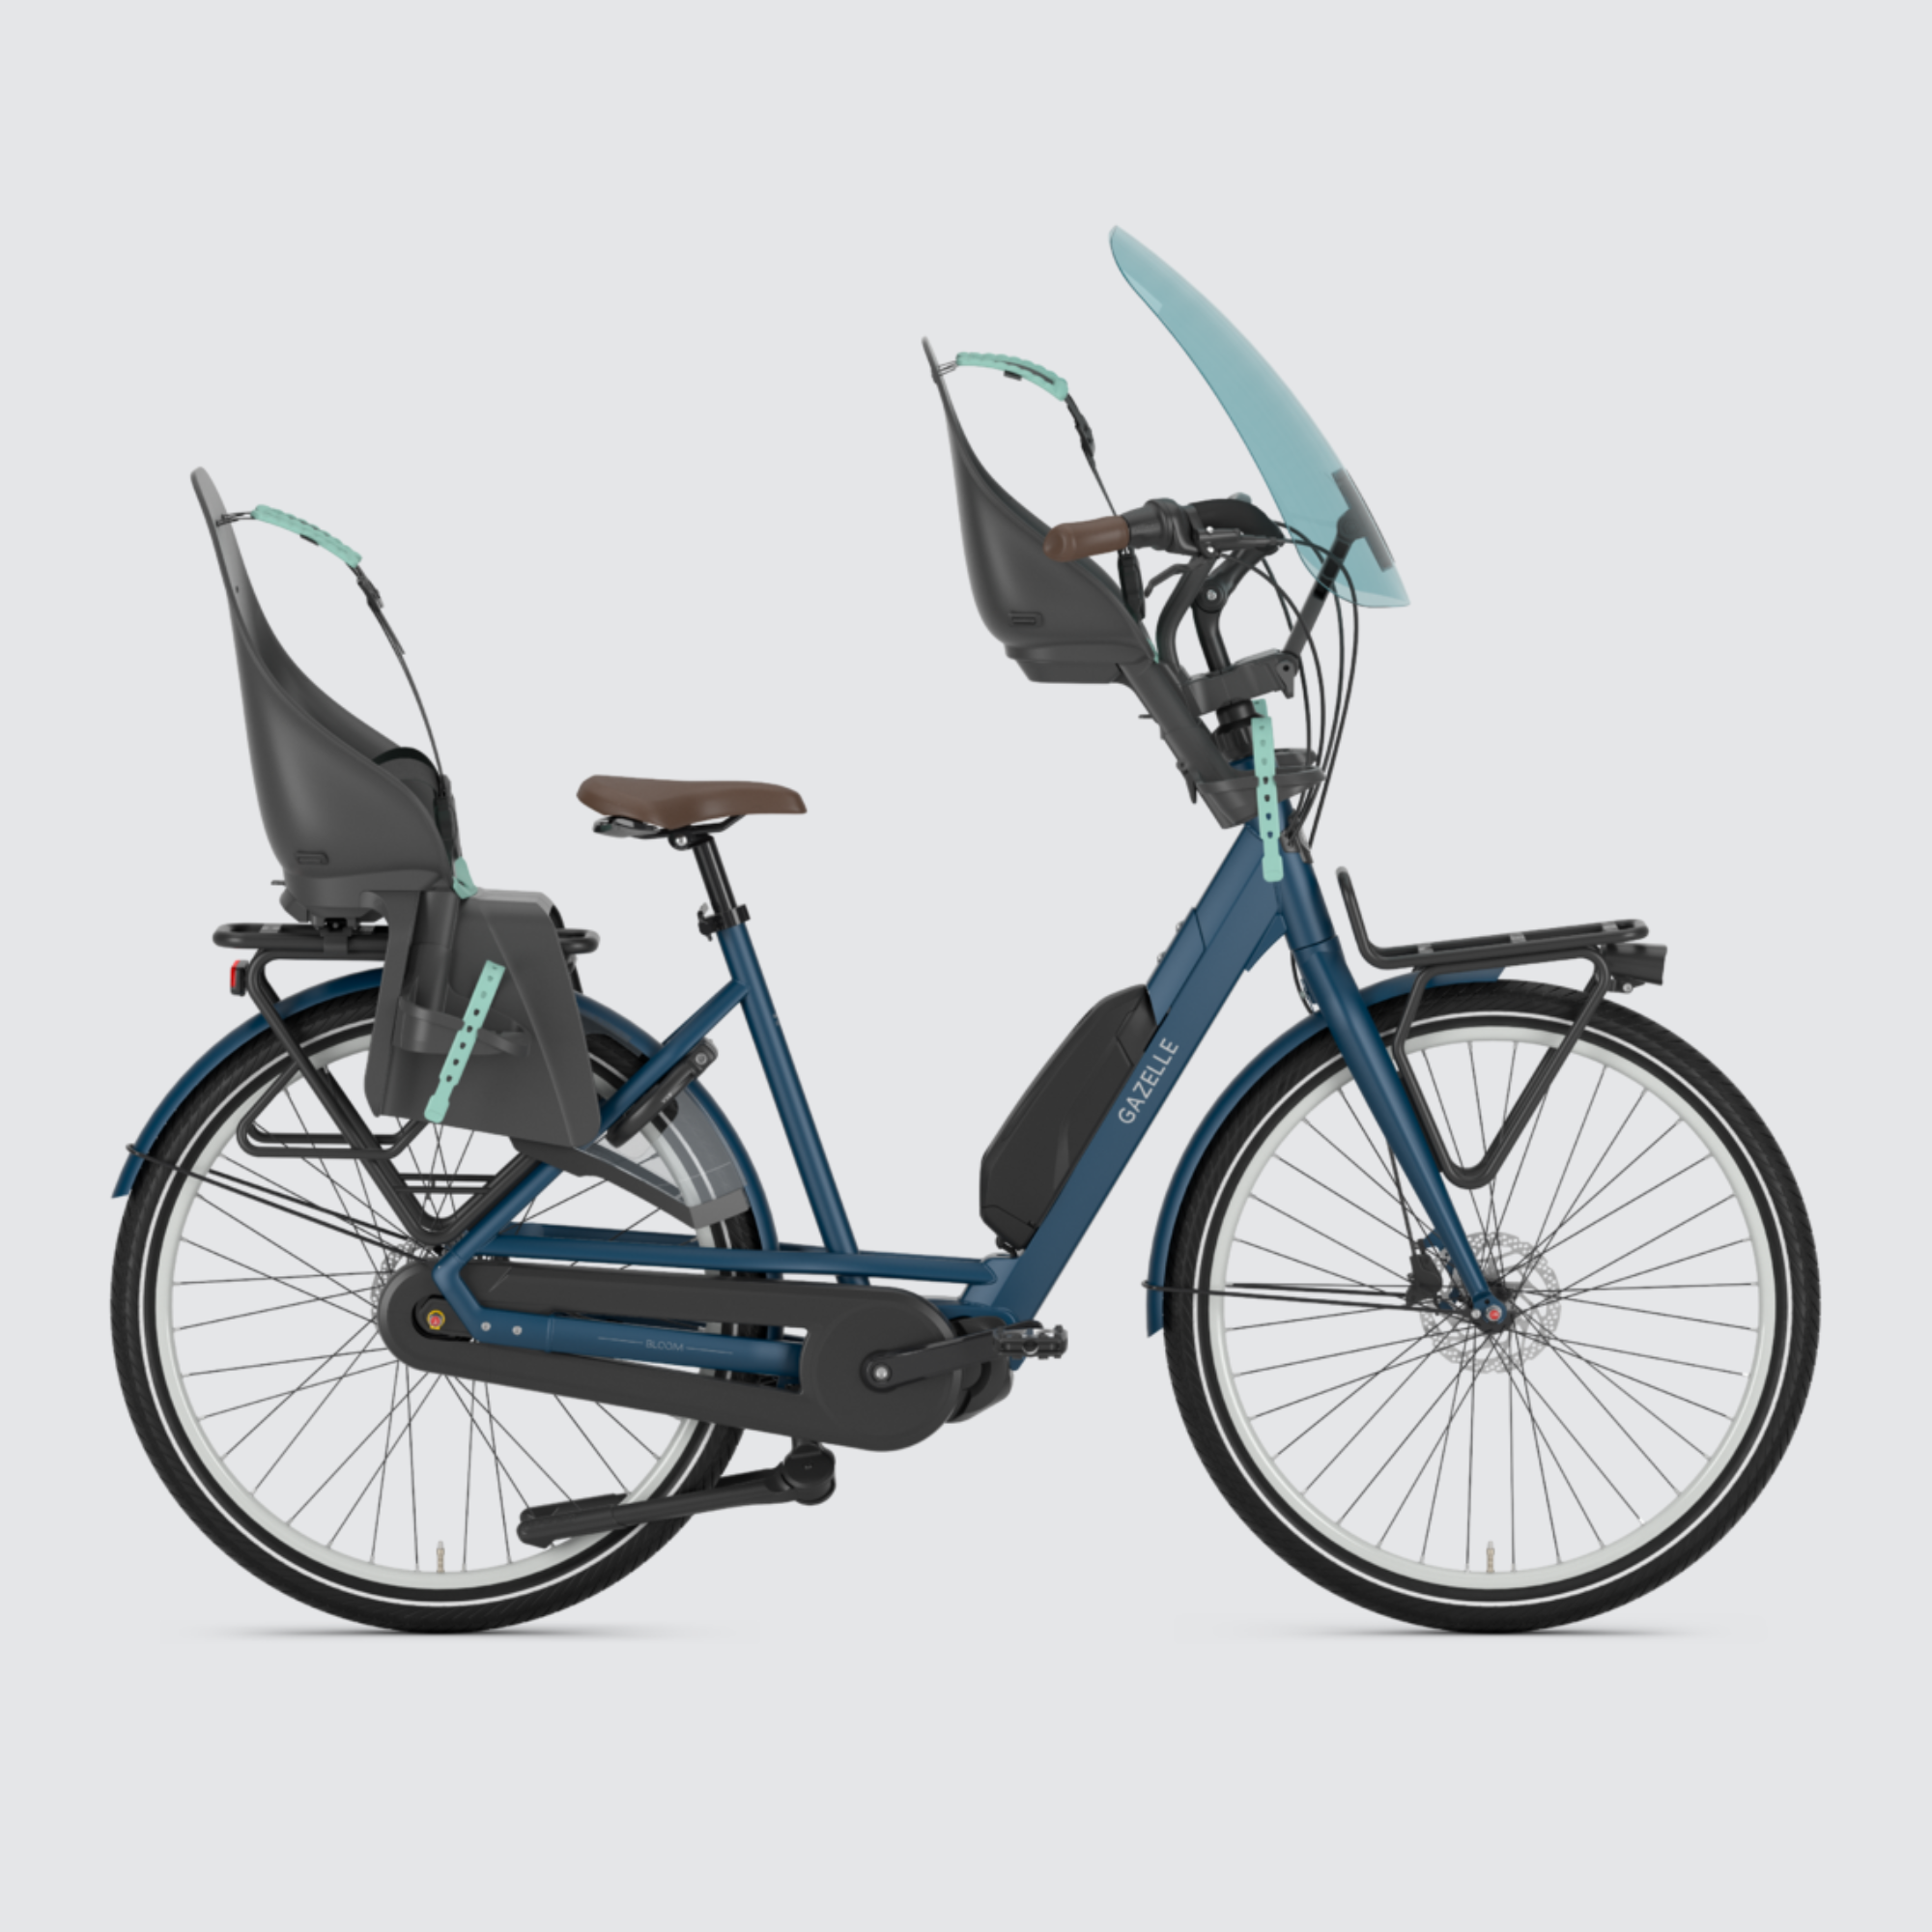 Discover the versatility of the Gazelle Bloom C7 HMS in mallard blue – designed for family joy and comfort on every ride. Bicycle shown with child seats in front and rear position with screen at the front. Child sseats and screen not included and must be purchased separately.